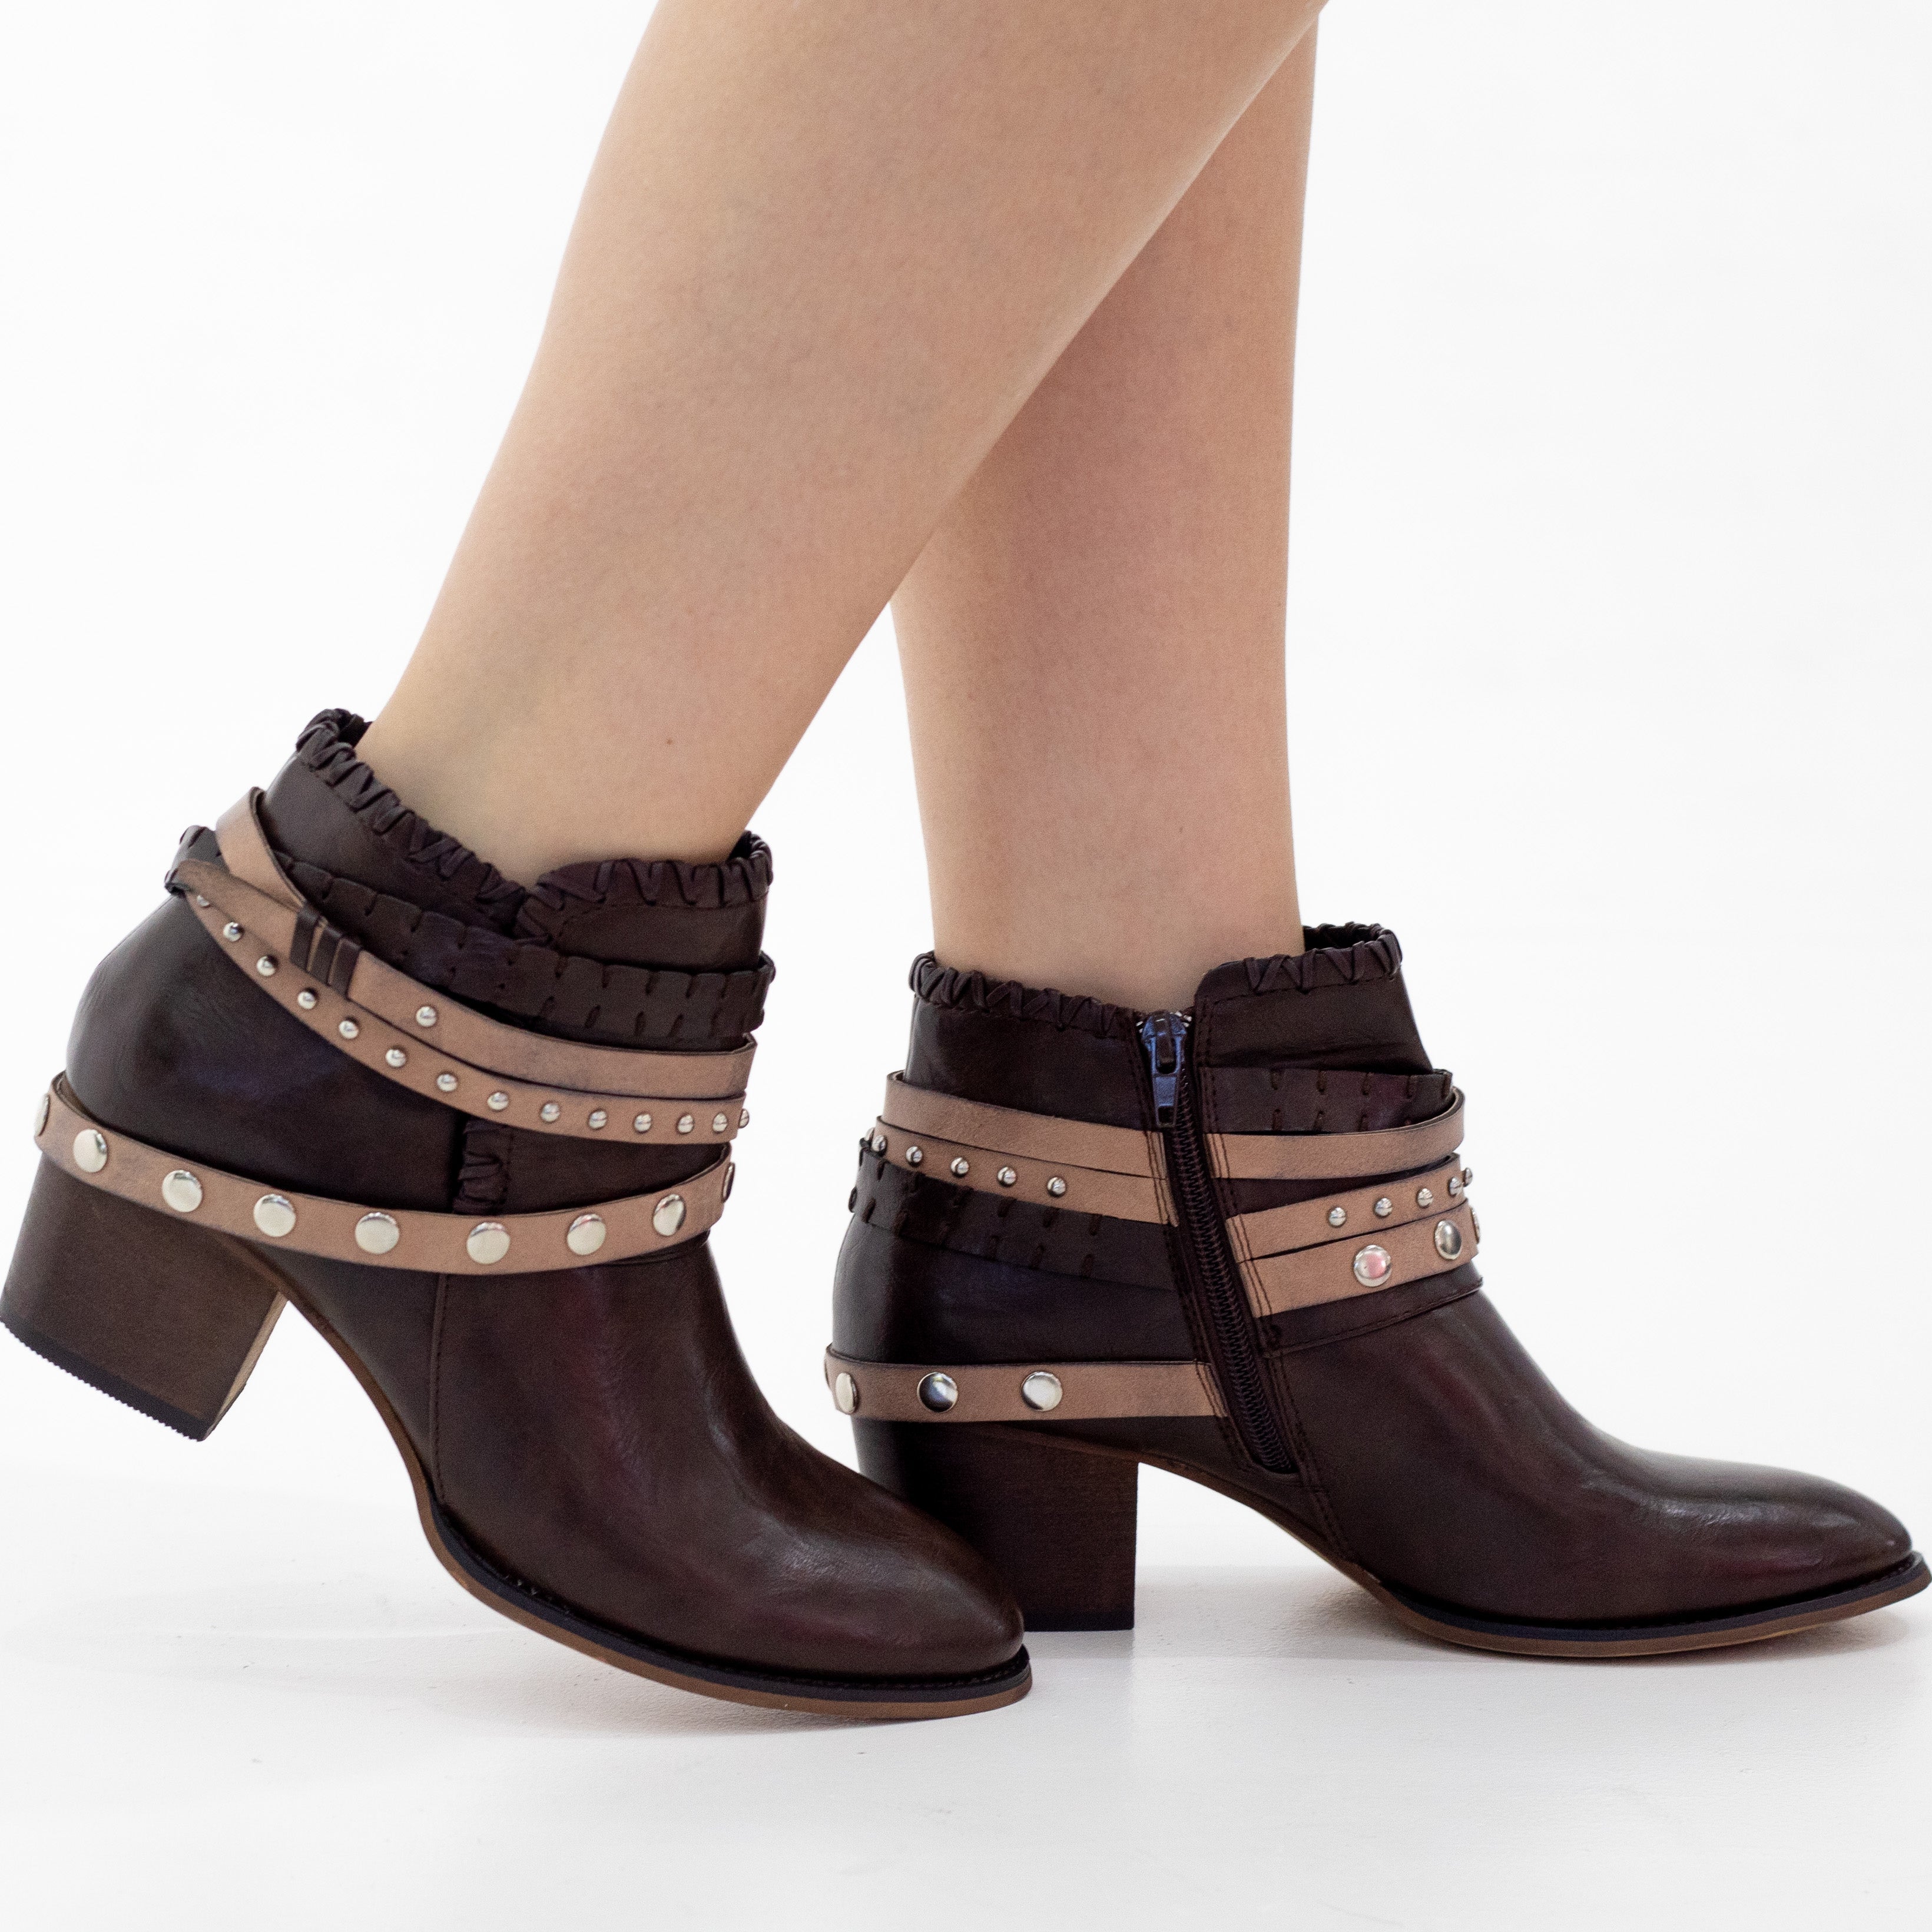 Sibyl cowboy with multiple strap ankle boot choc